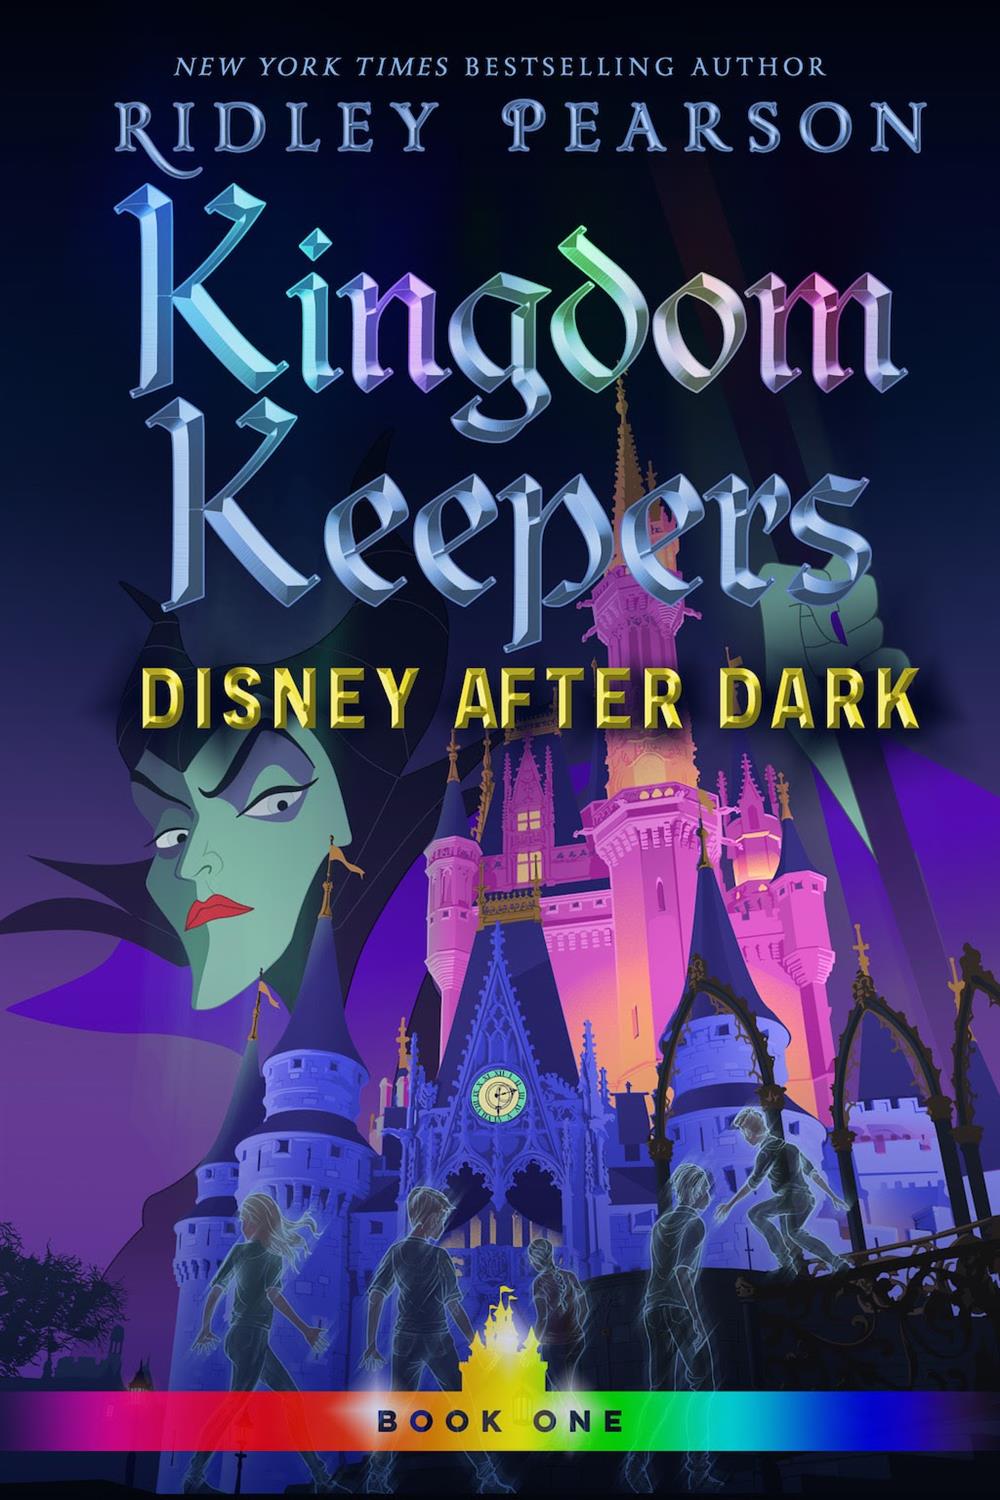 Disney Celebrates Updated Editions of "Kingdom Keepers" Series with New